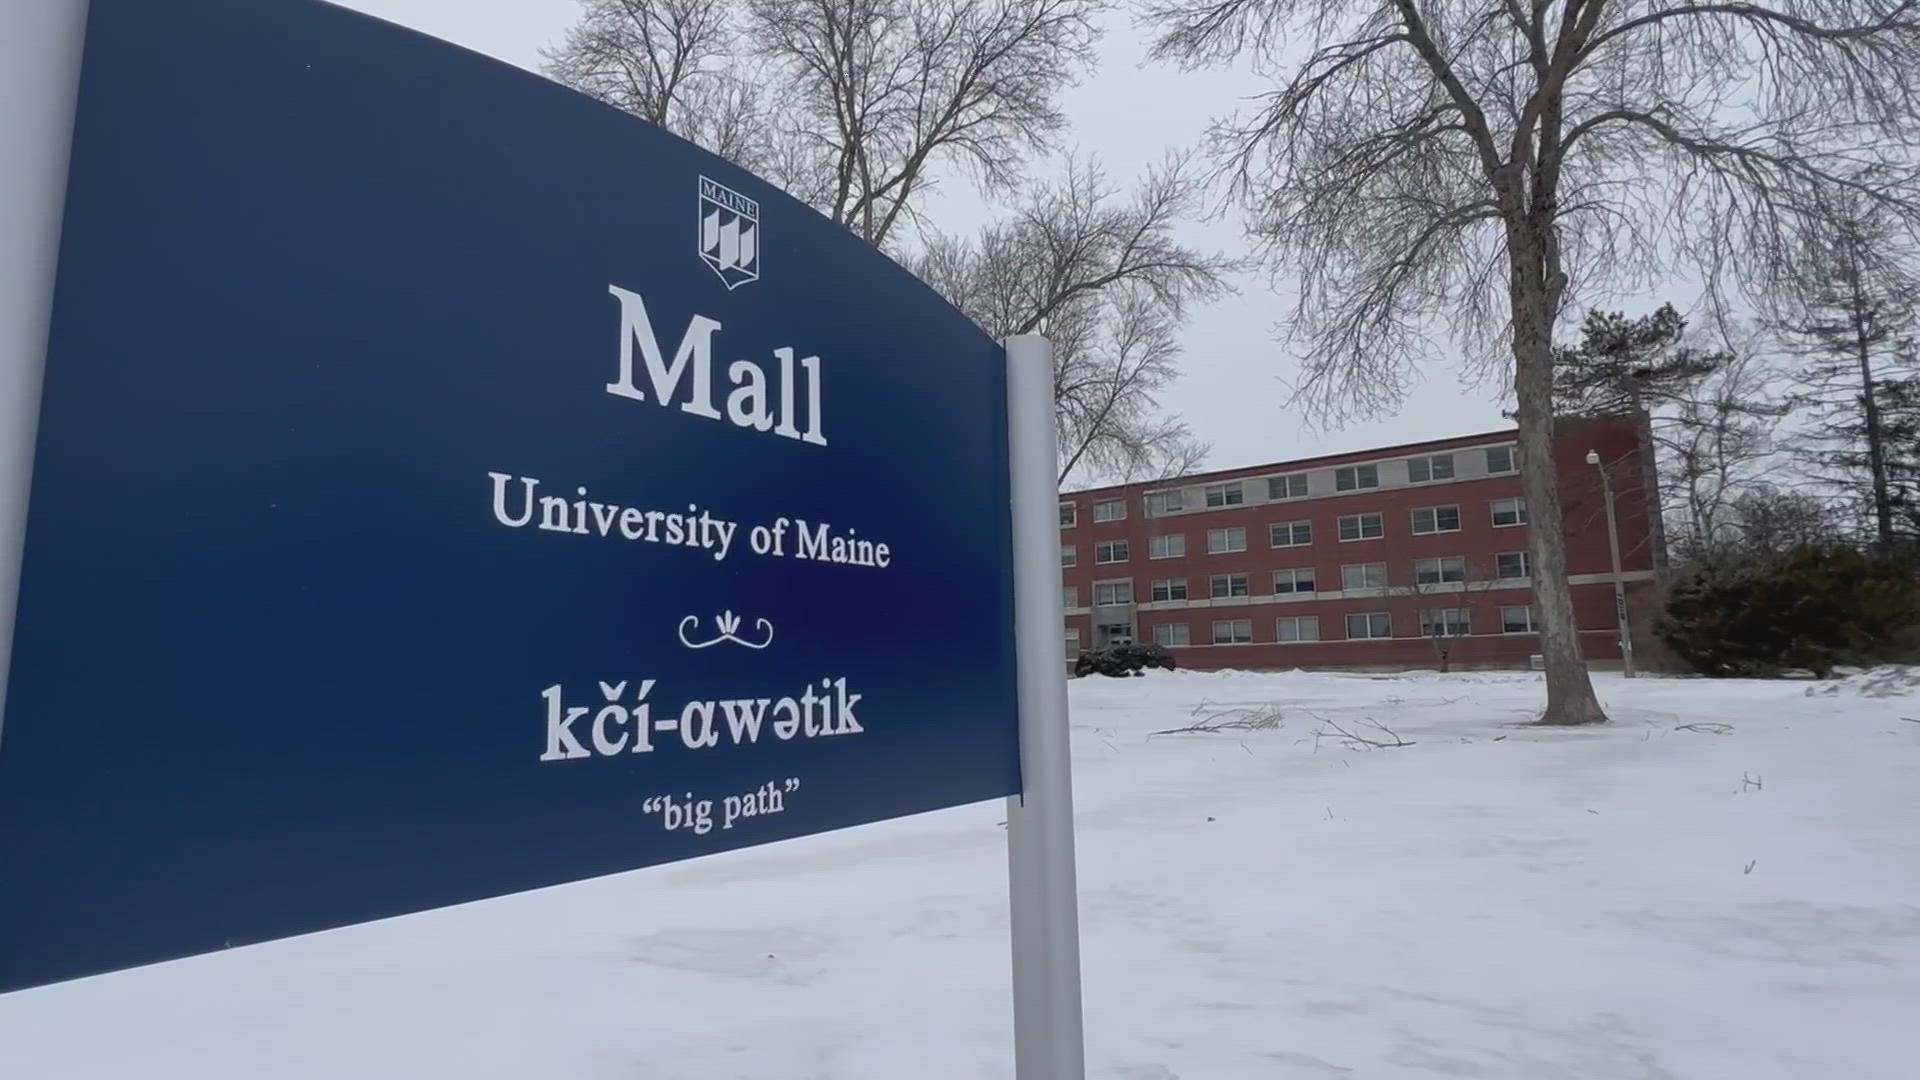 In 2019, UMaine added bilingual signs across campus that feature the Penobscot language. Now, the university is taking that project one step further.